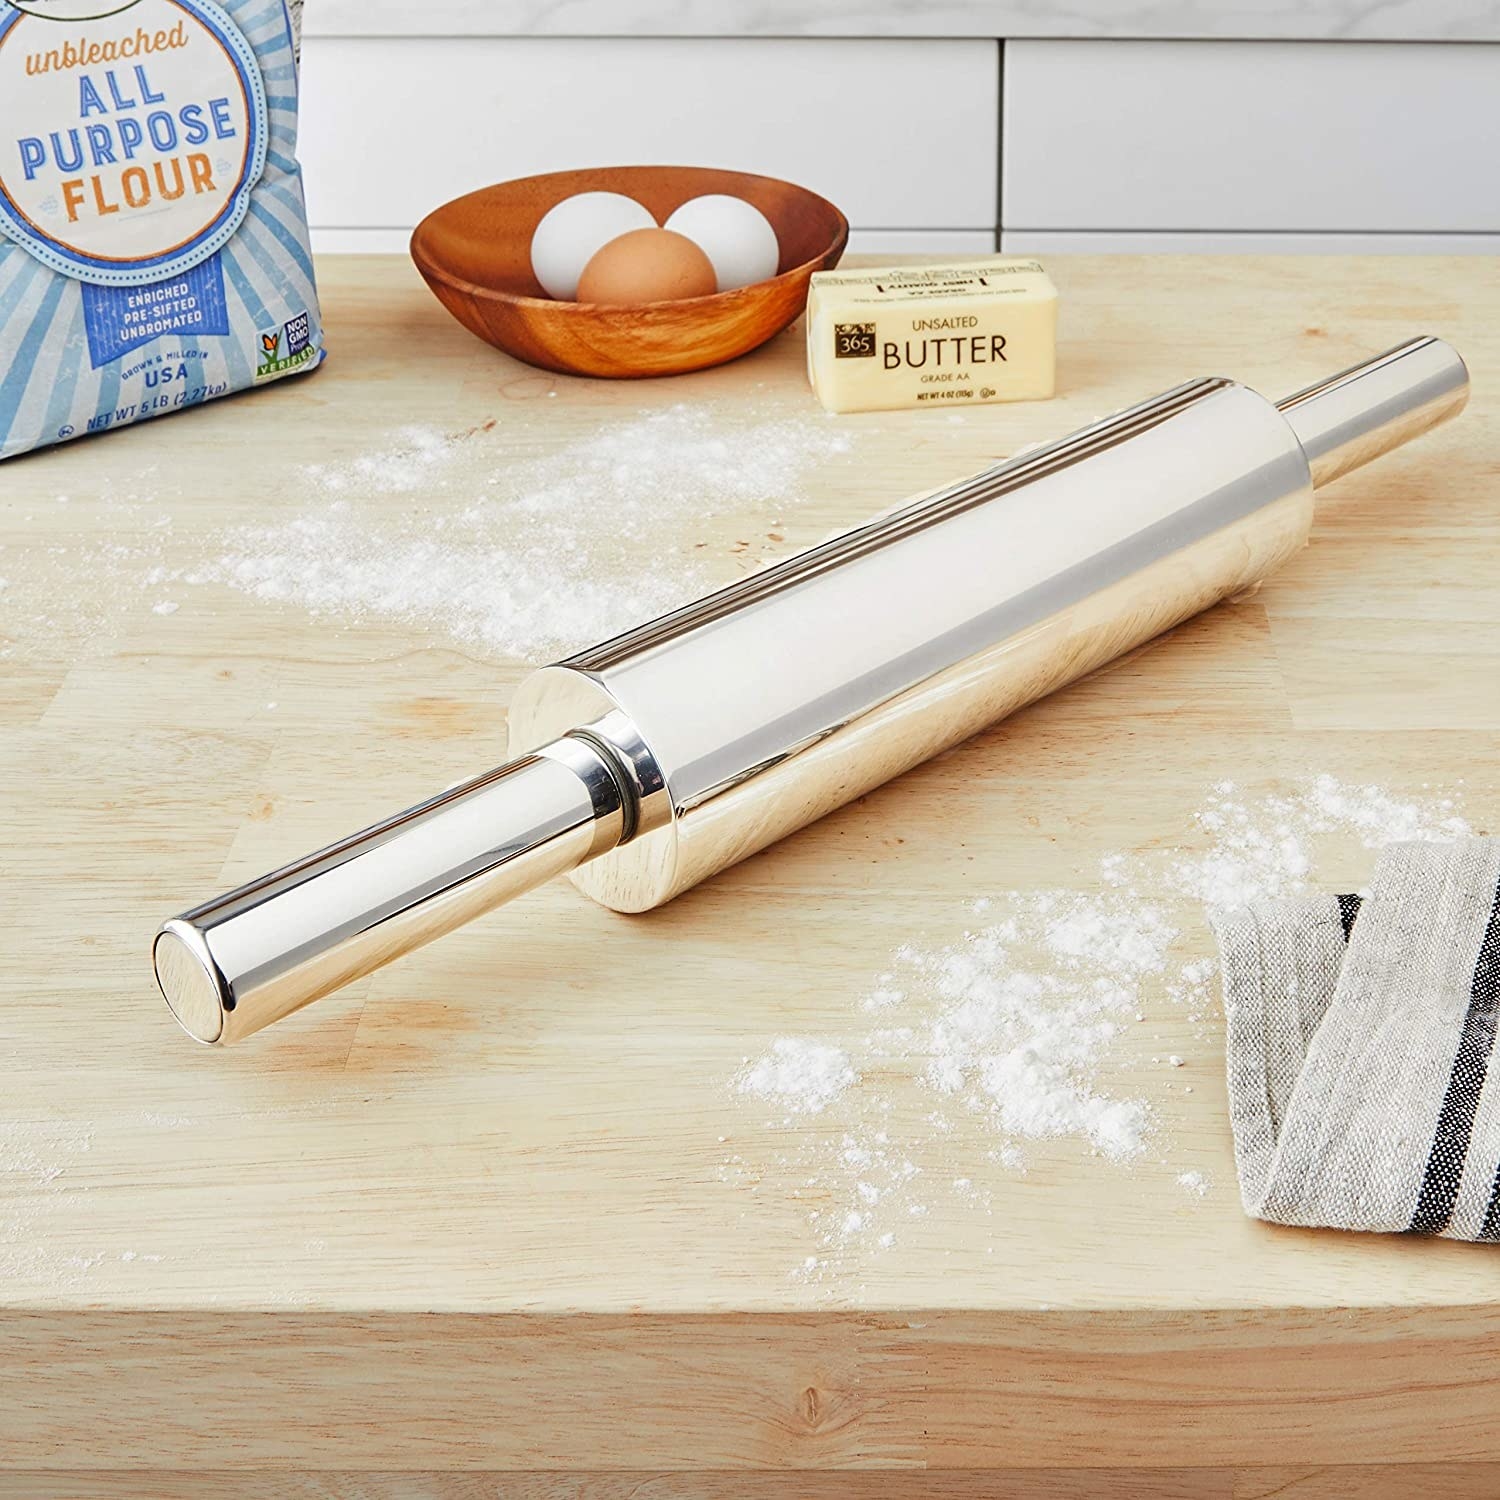 The rolling pin on a floured surface